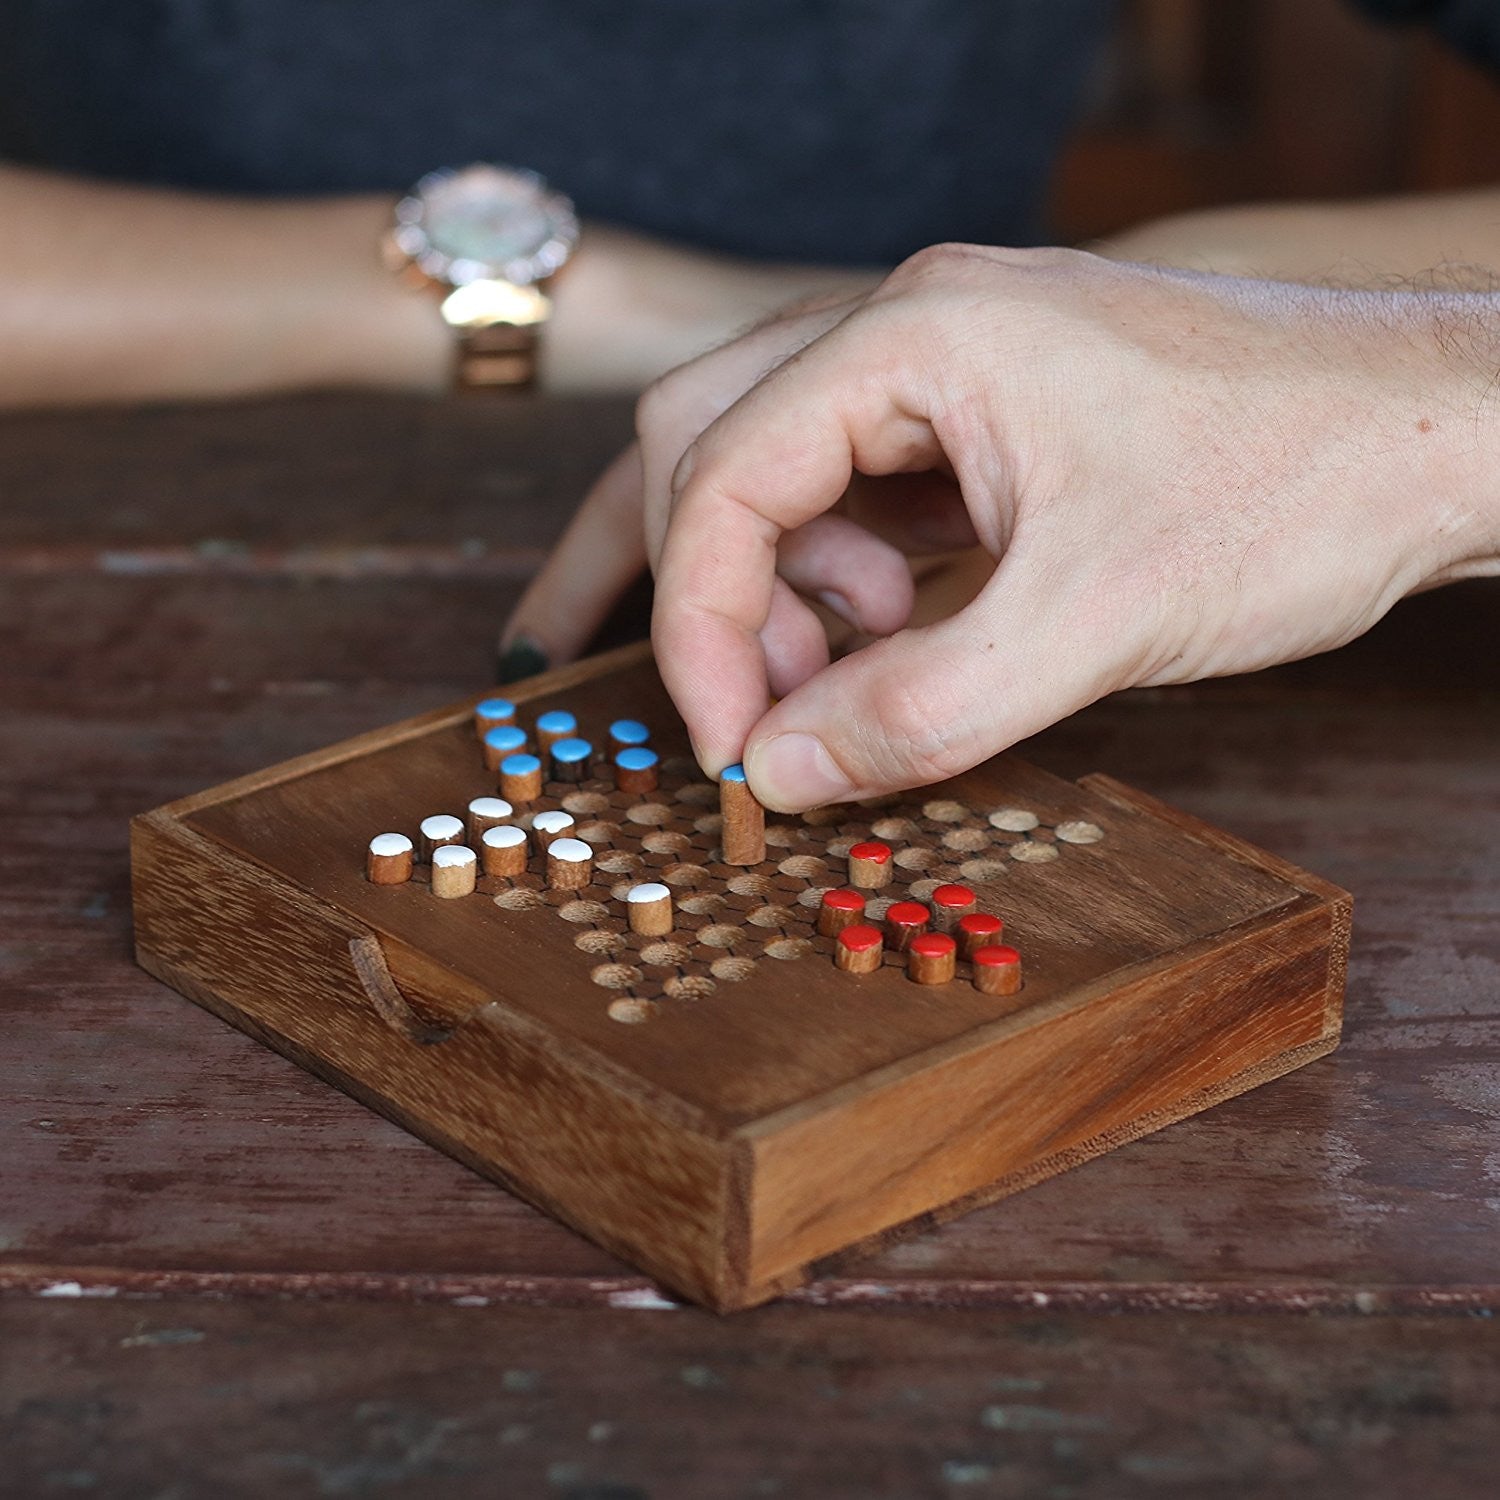 chinese checkers rules for 2 players